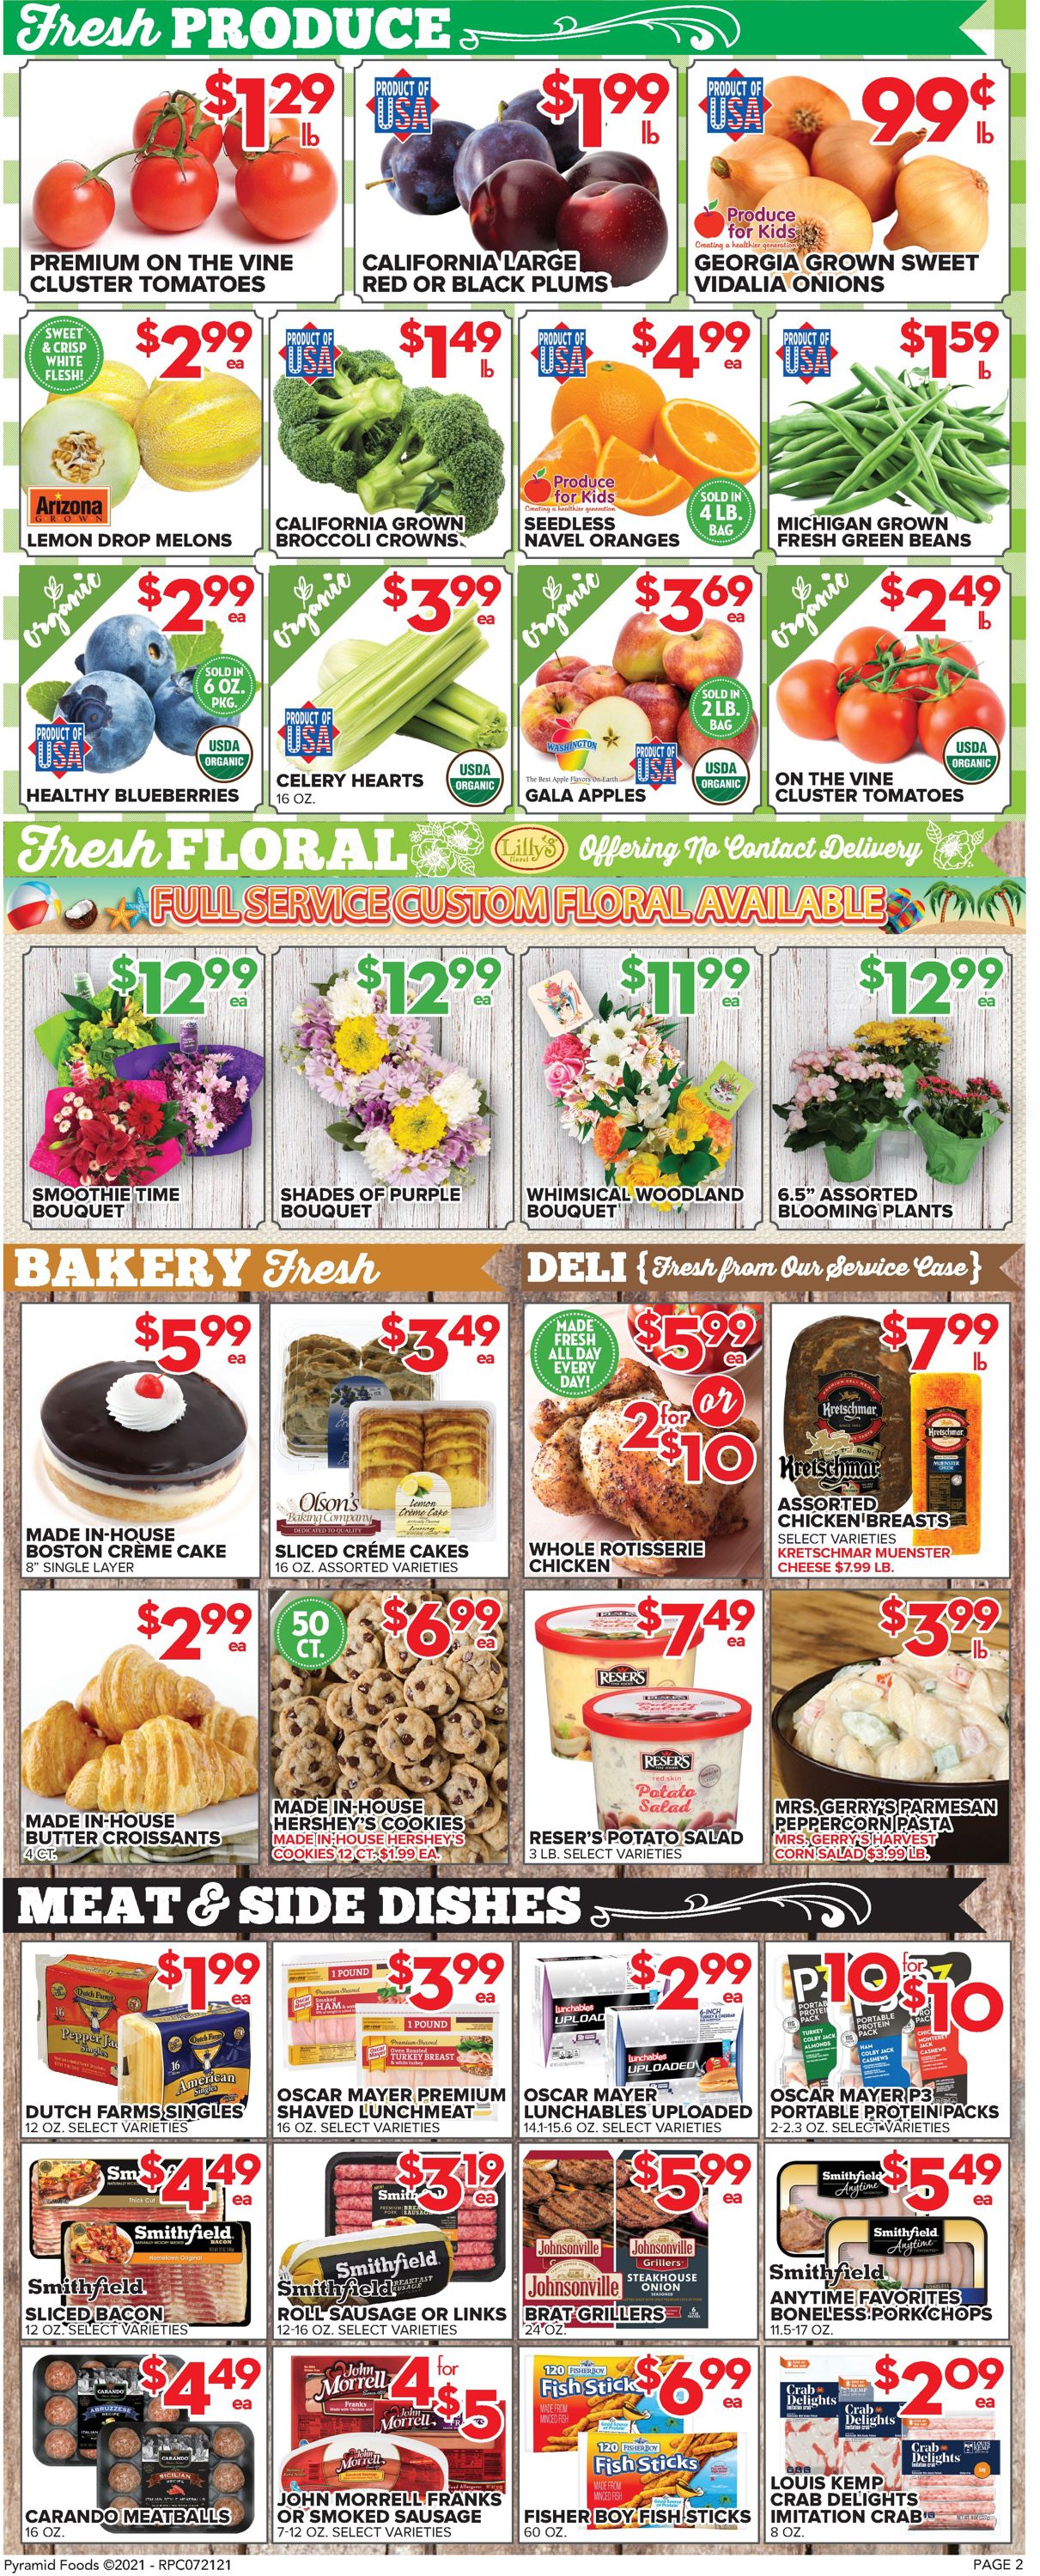 Price Cutter Weekly Ad Circular - valid 07/21-07/27/2021 (Page 2)